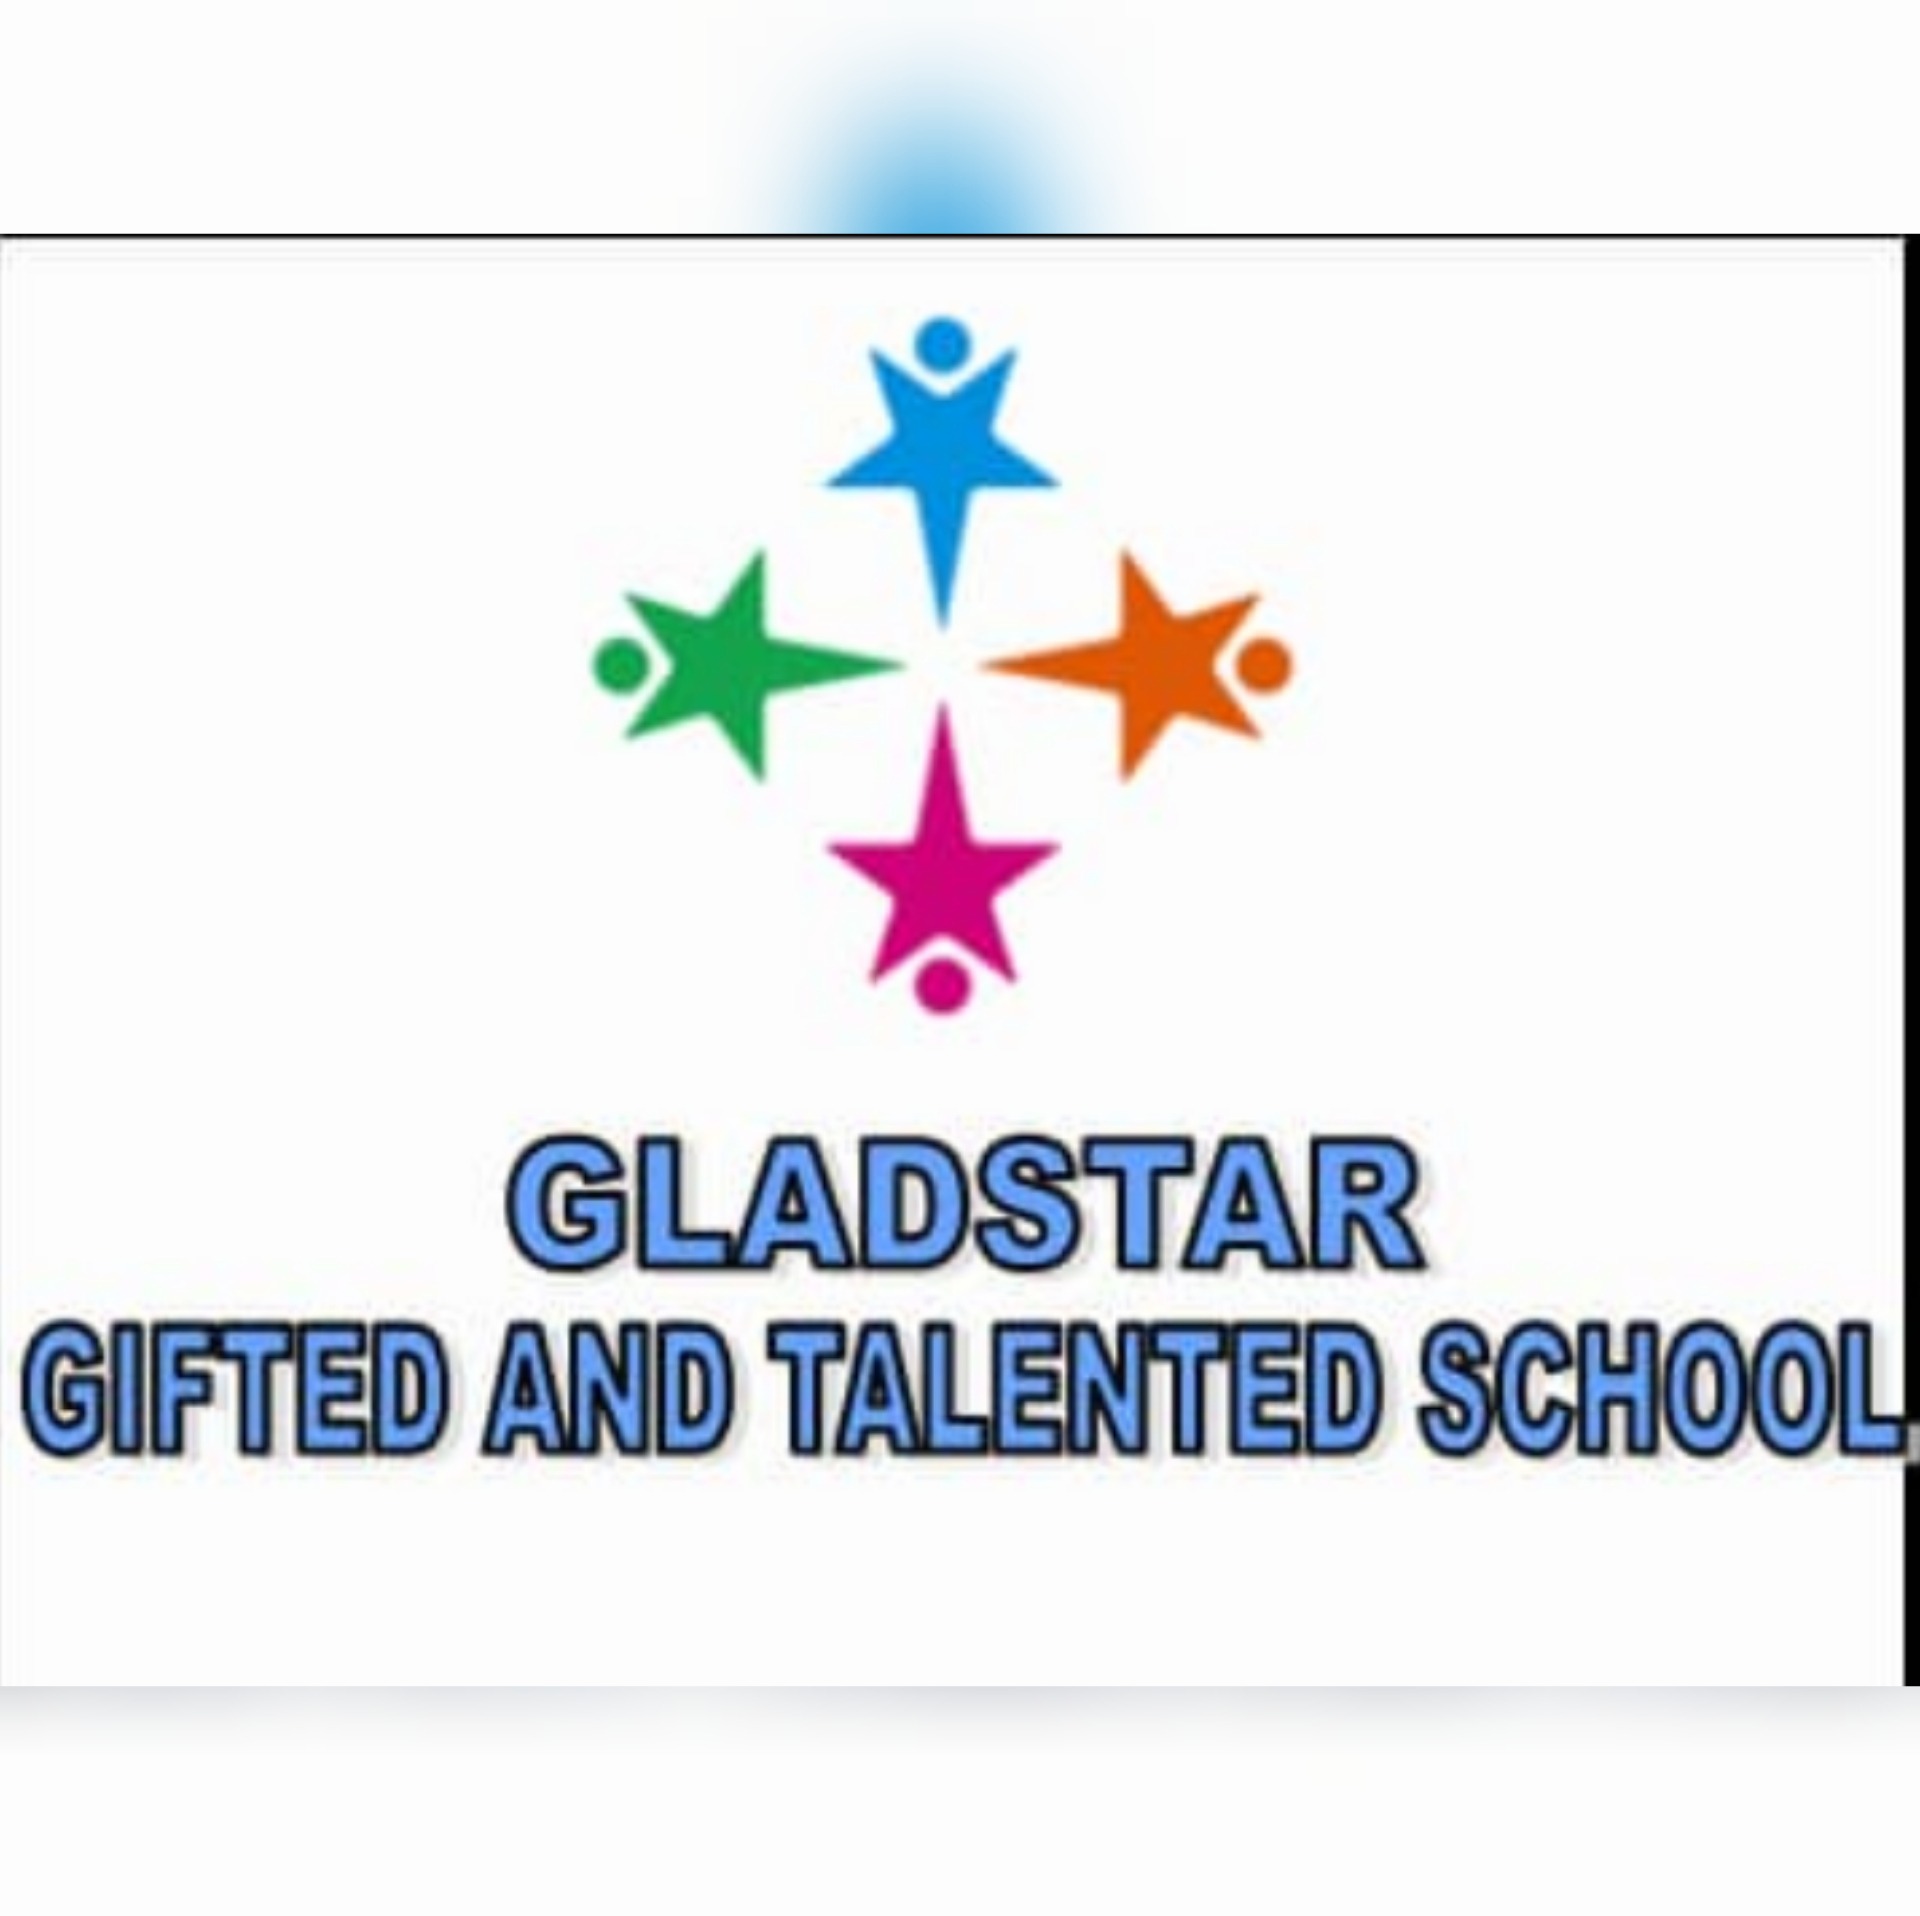 Gladstar gifted and talented school logo